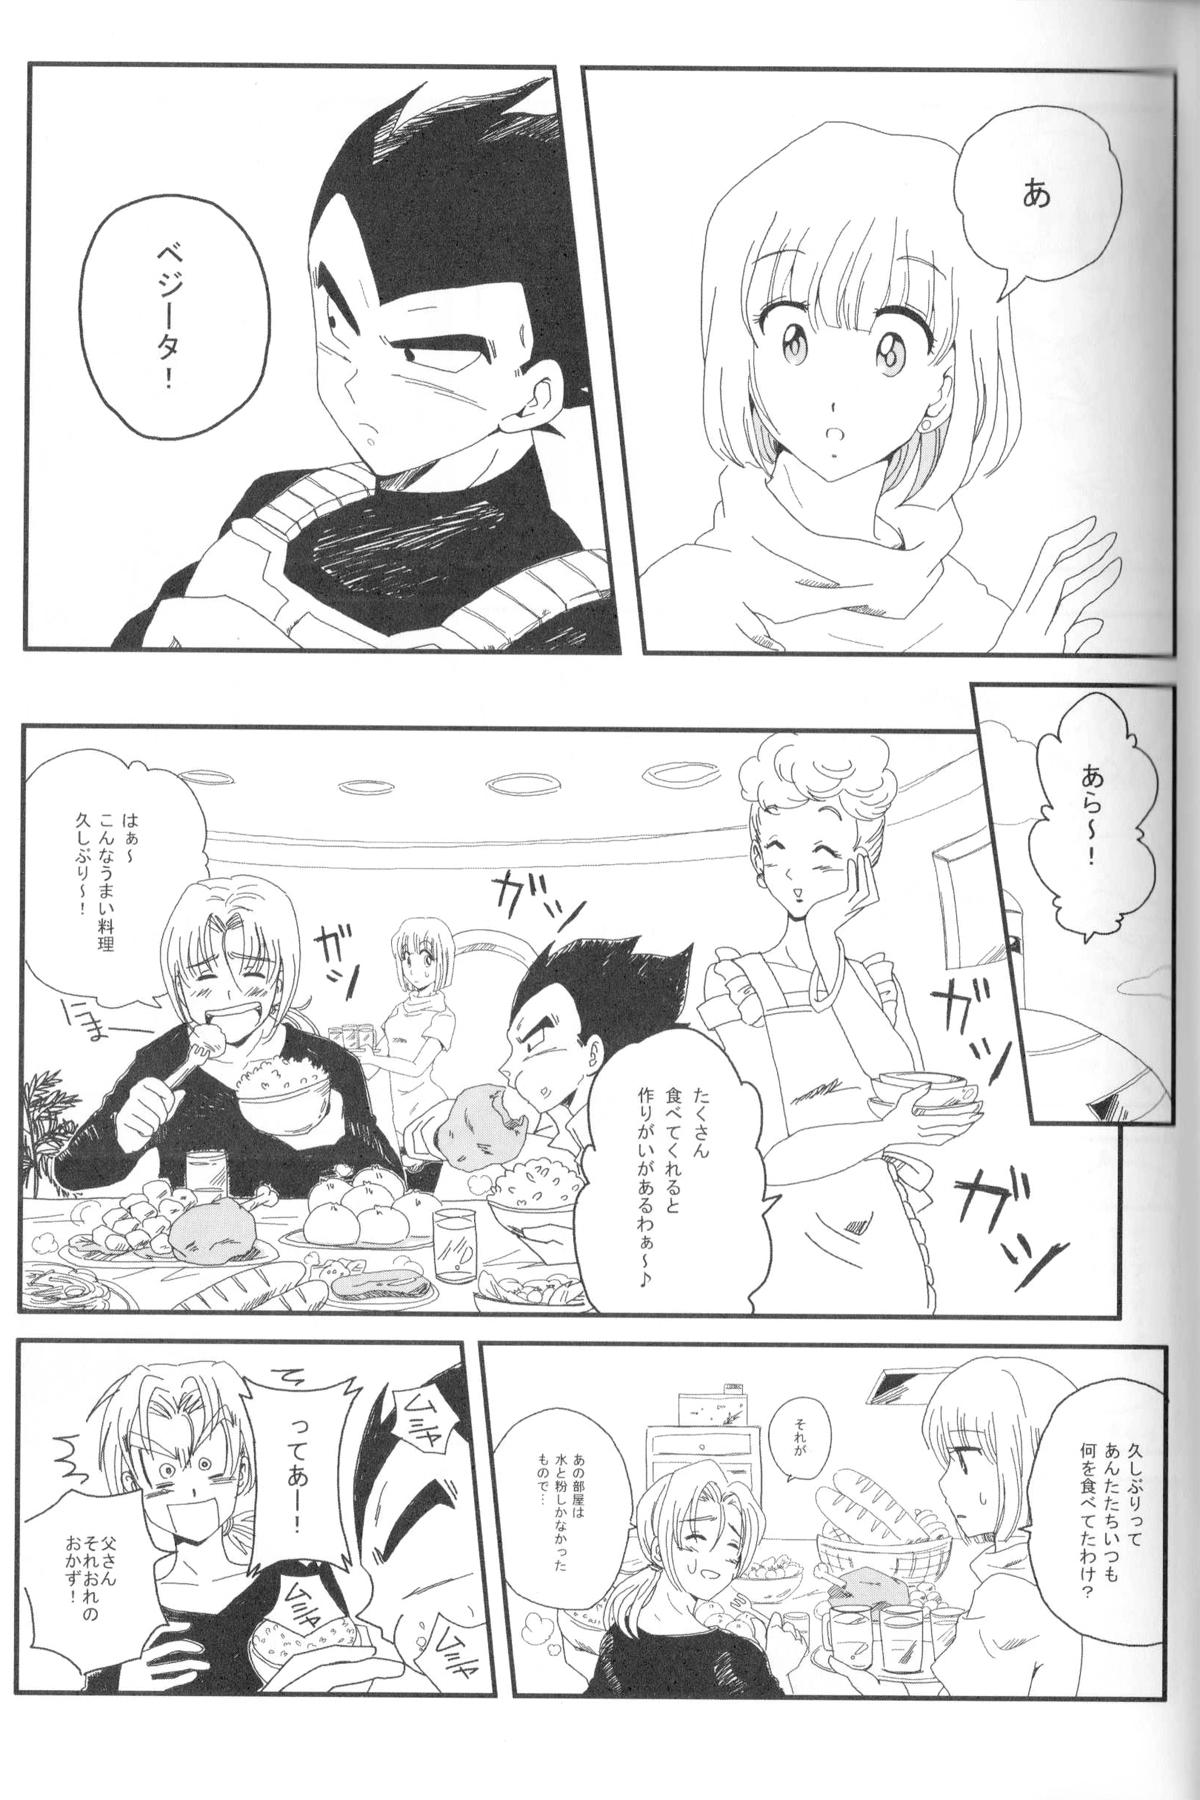 Perfect Butt Pure Love - Dragon ball z Long - Page 4